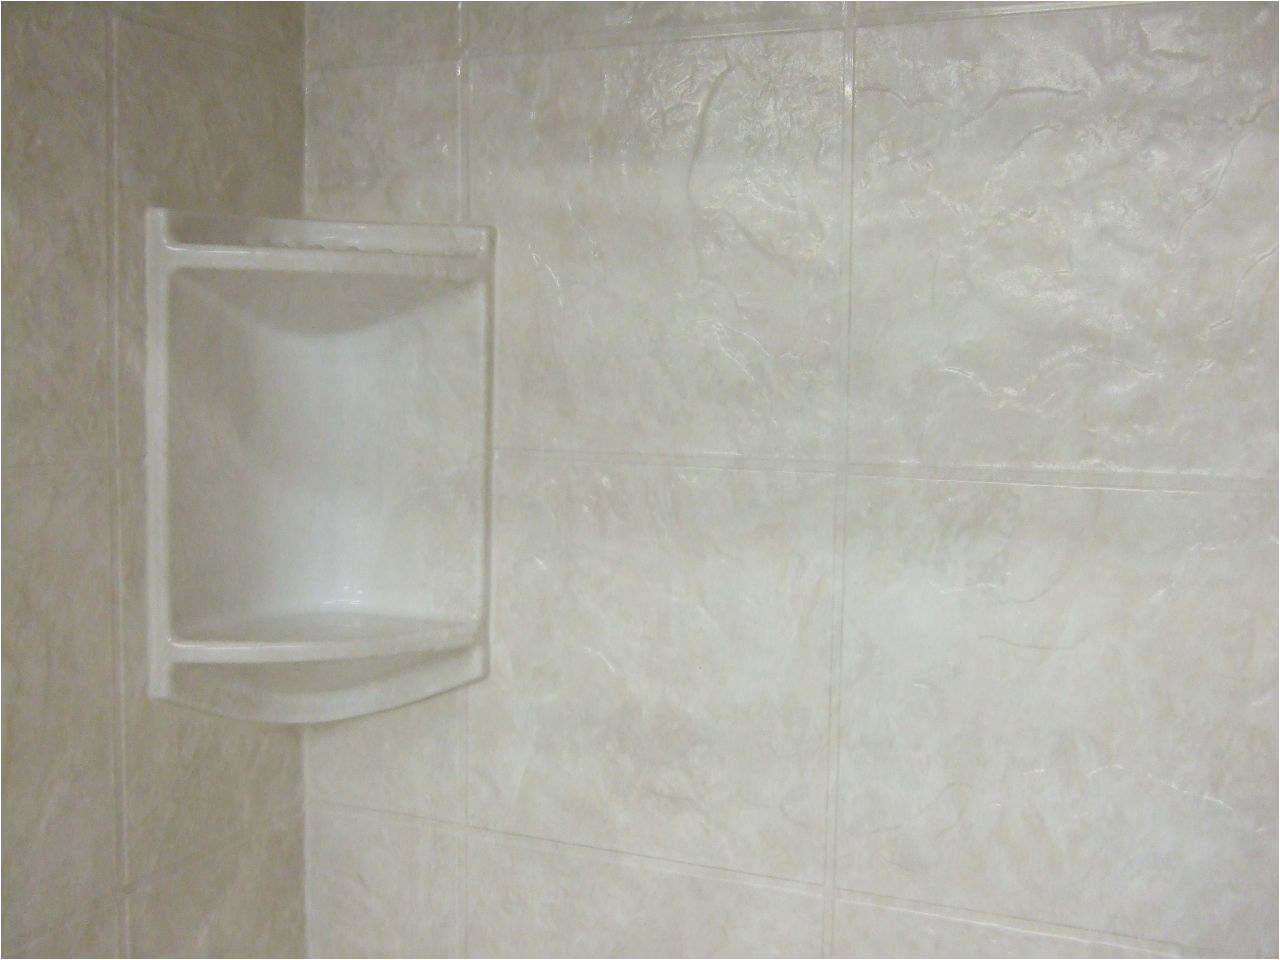 Acrylic Tile Bathtubs How to Choose Grout Free Shower or Tub Wall Panels